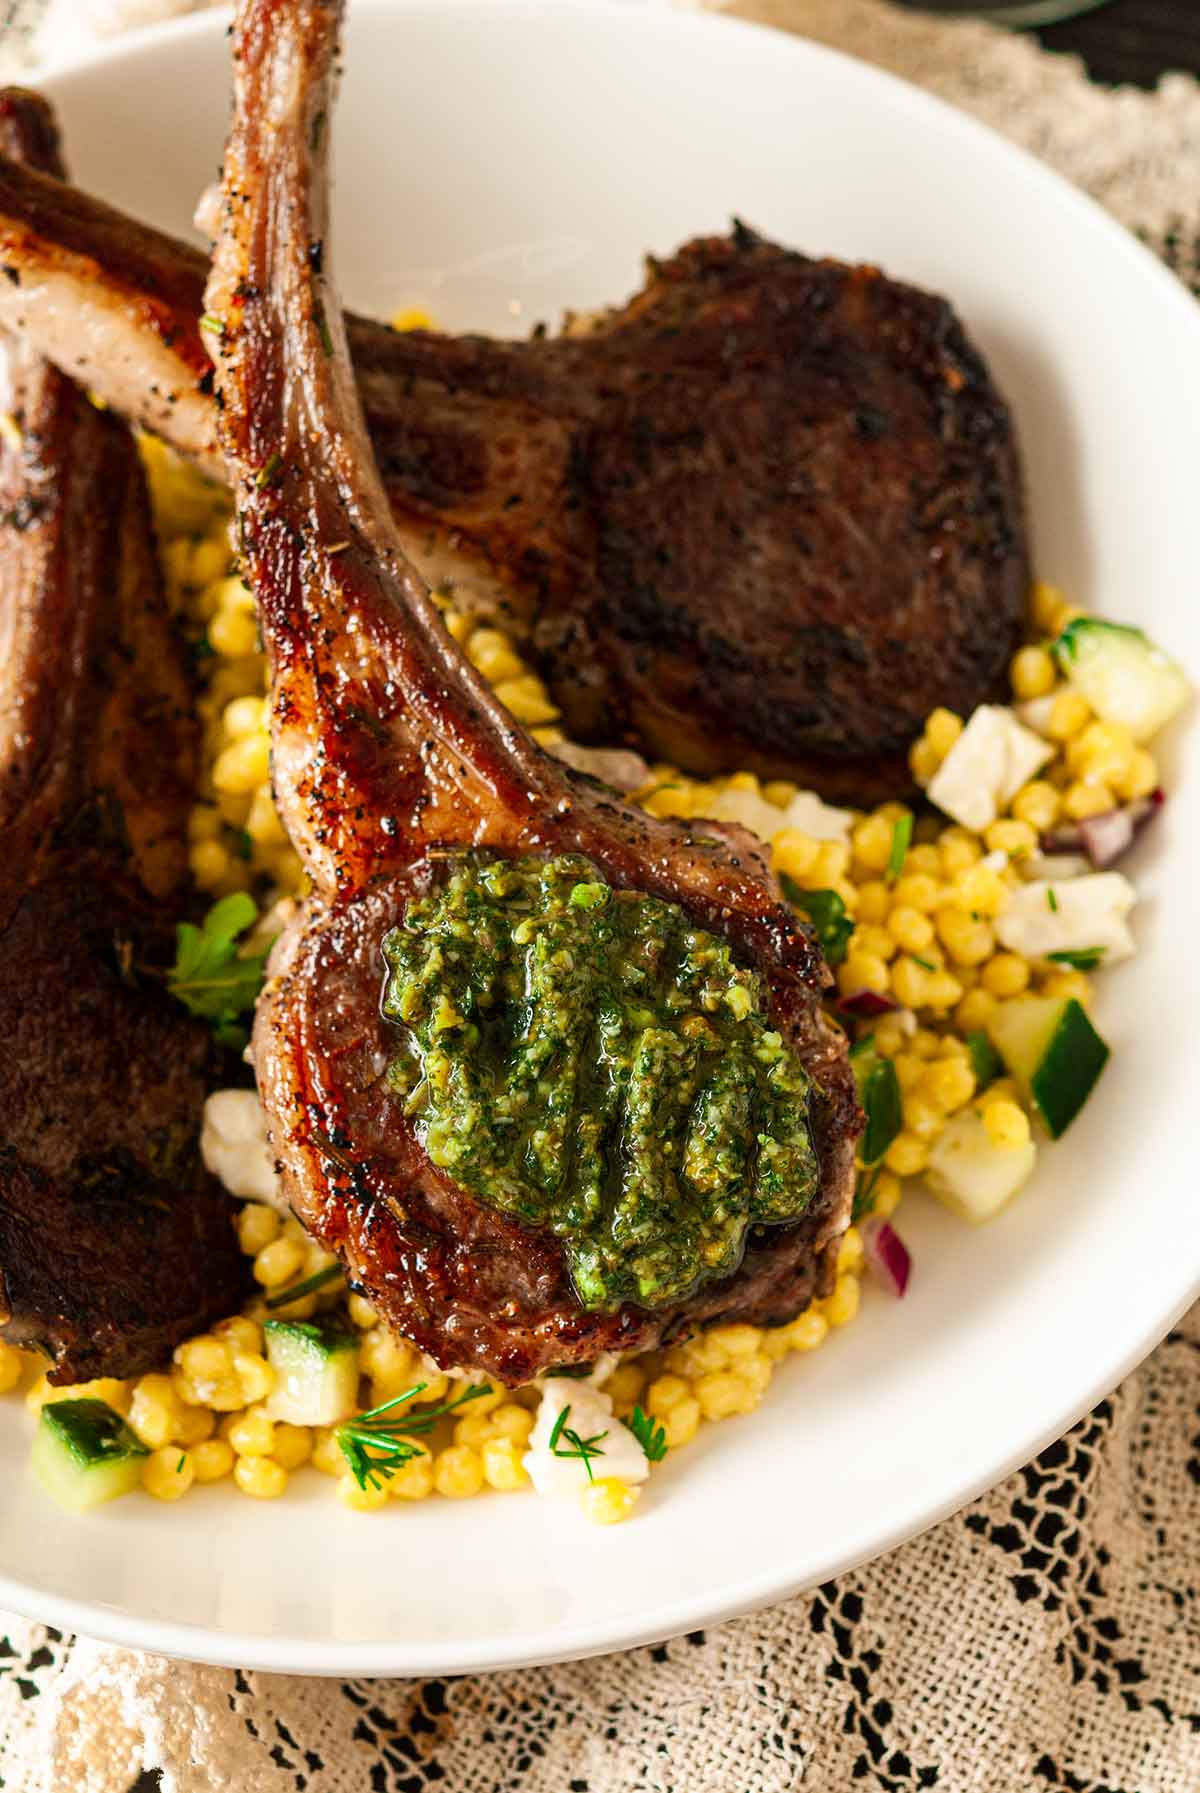 A lamb chop with mint pesto in a bowl with 2 others, on top of pearl couscous.